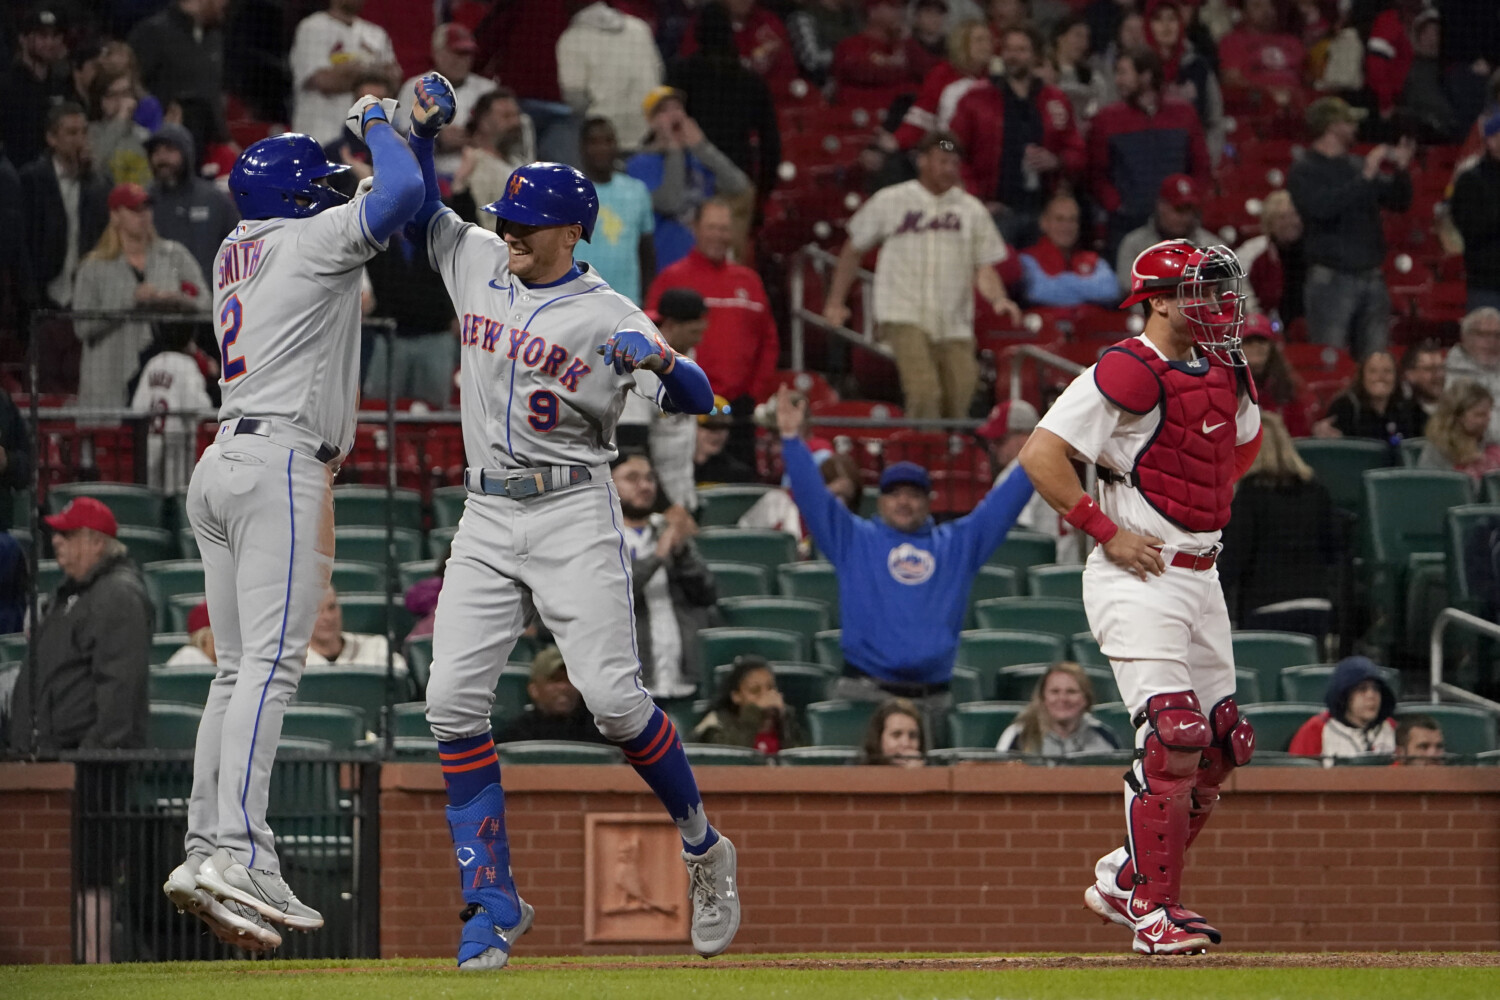 Wilmer Flores' walk-off homer helps Giants stop Phillies' late push